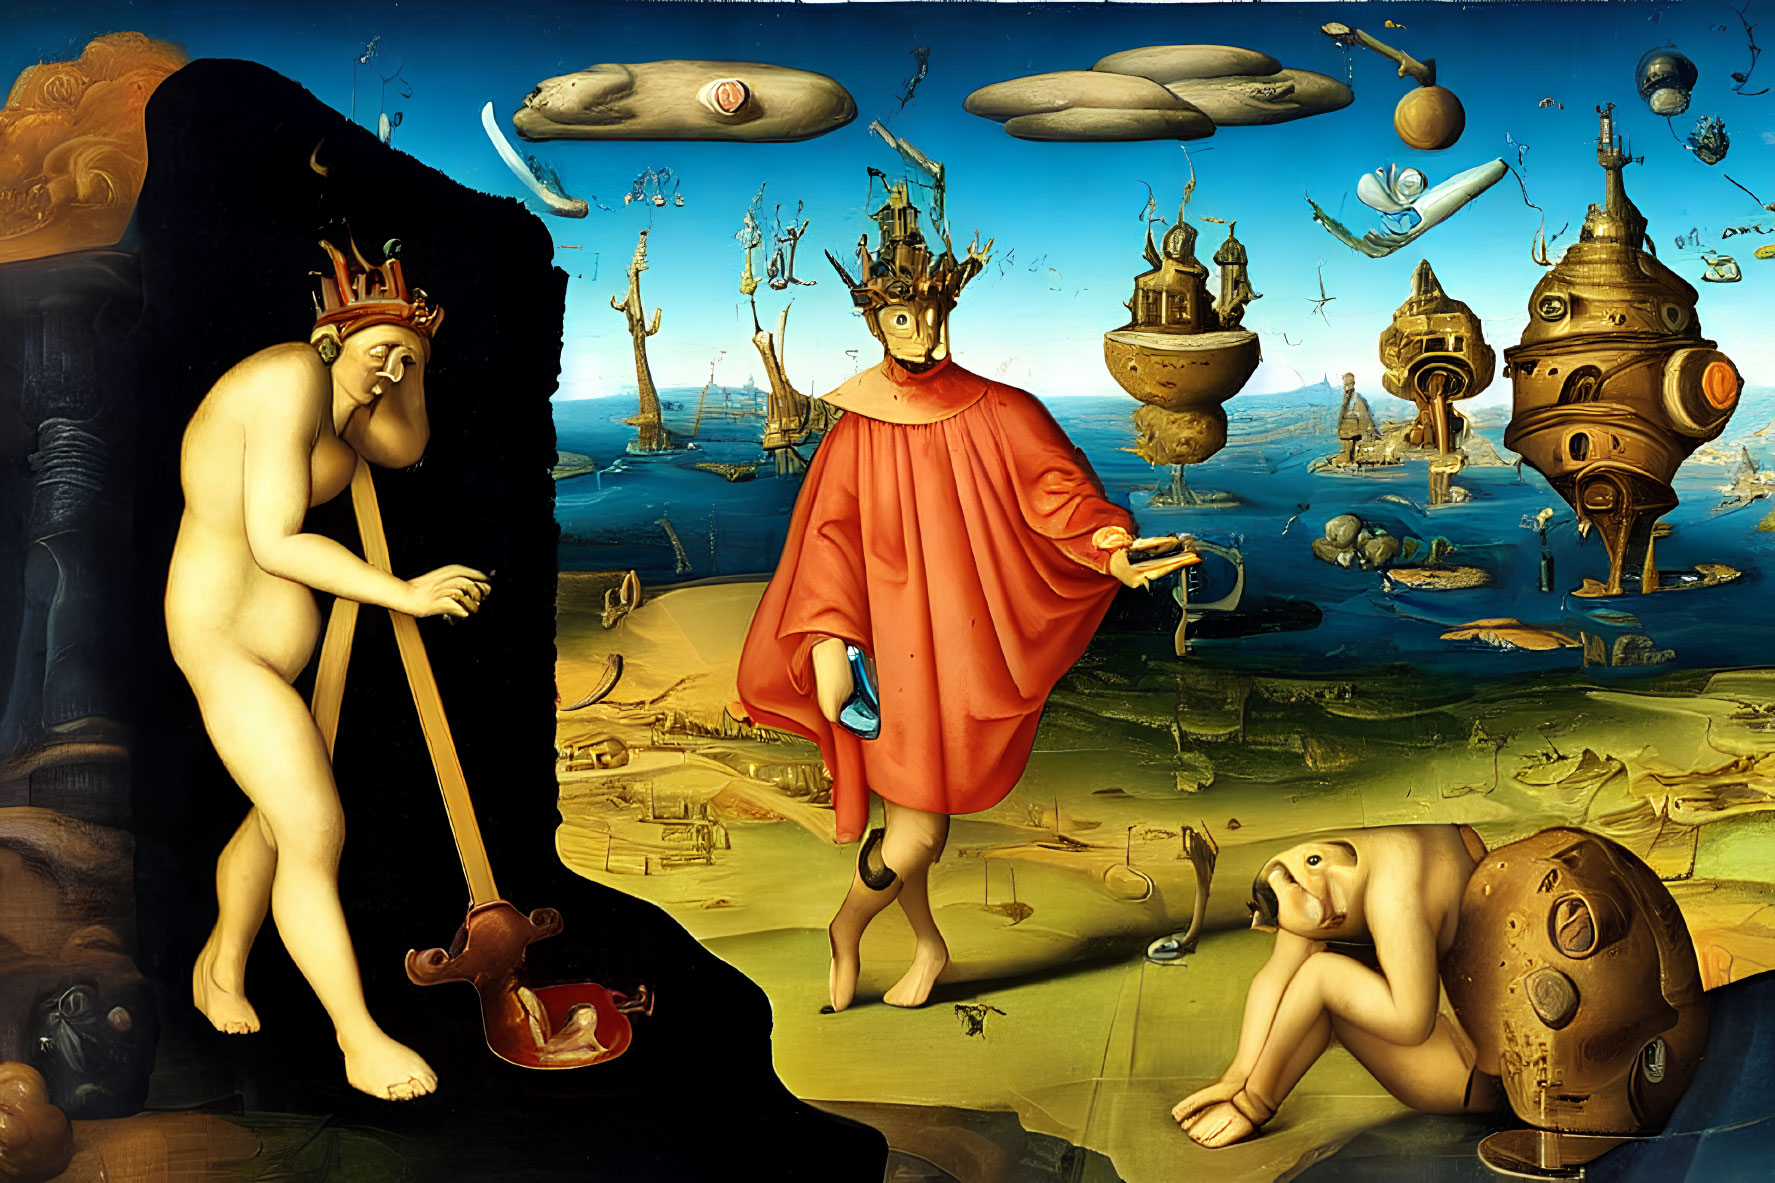 Surreal Artwork Featuring Crowned Figure, Airships, Nude Person, Creatures, and Wh